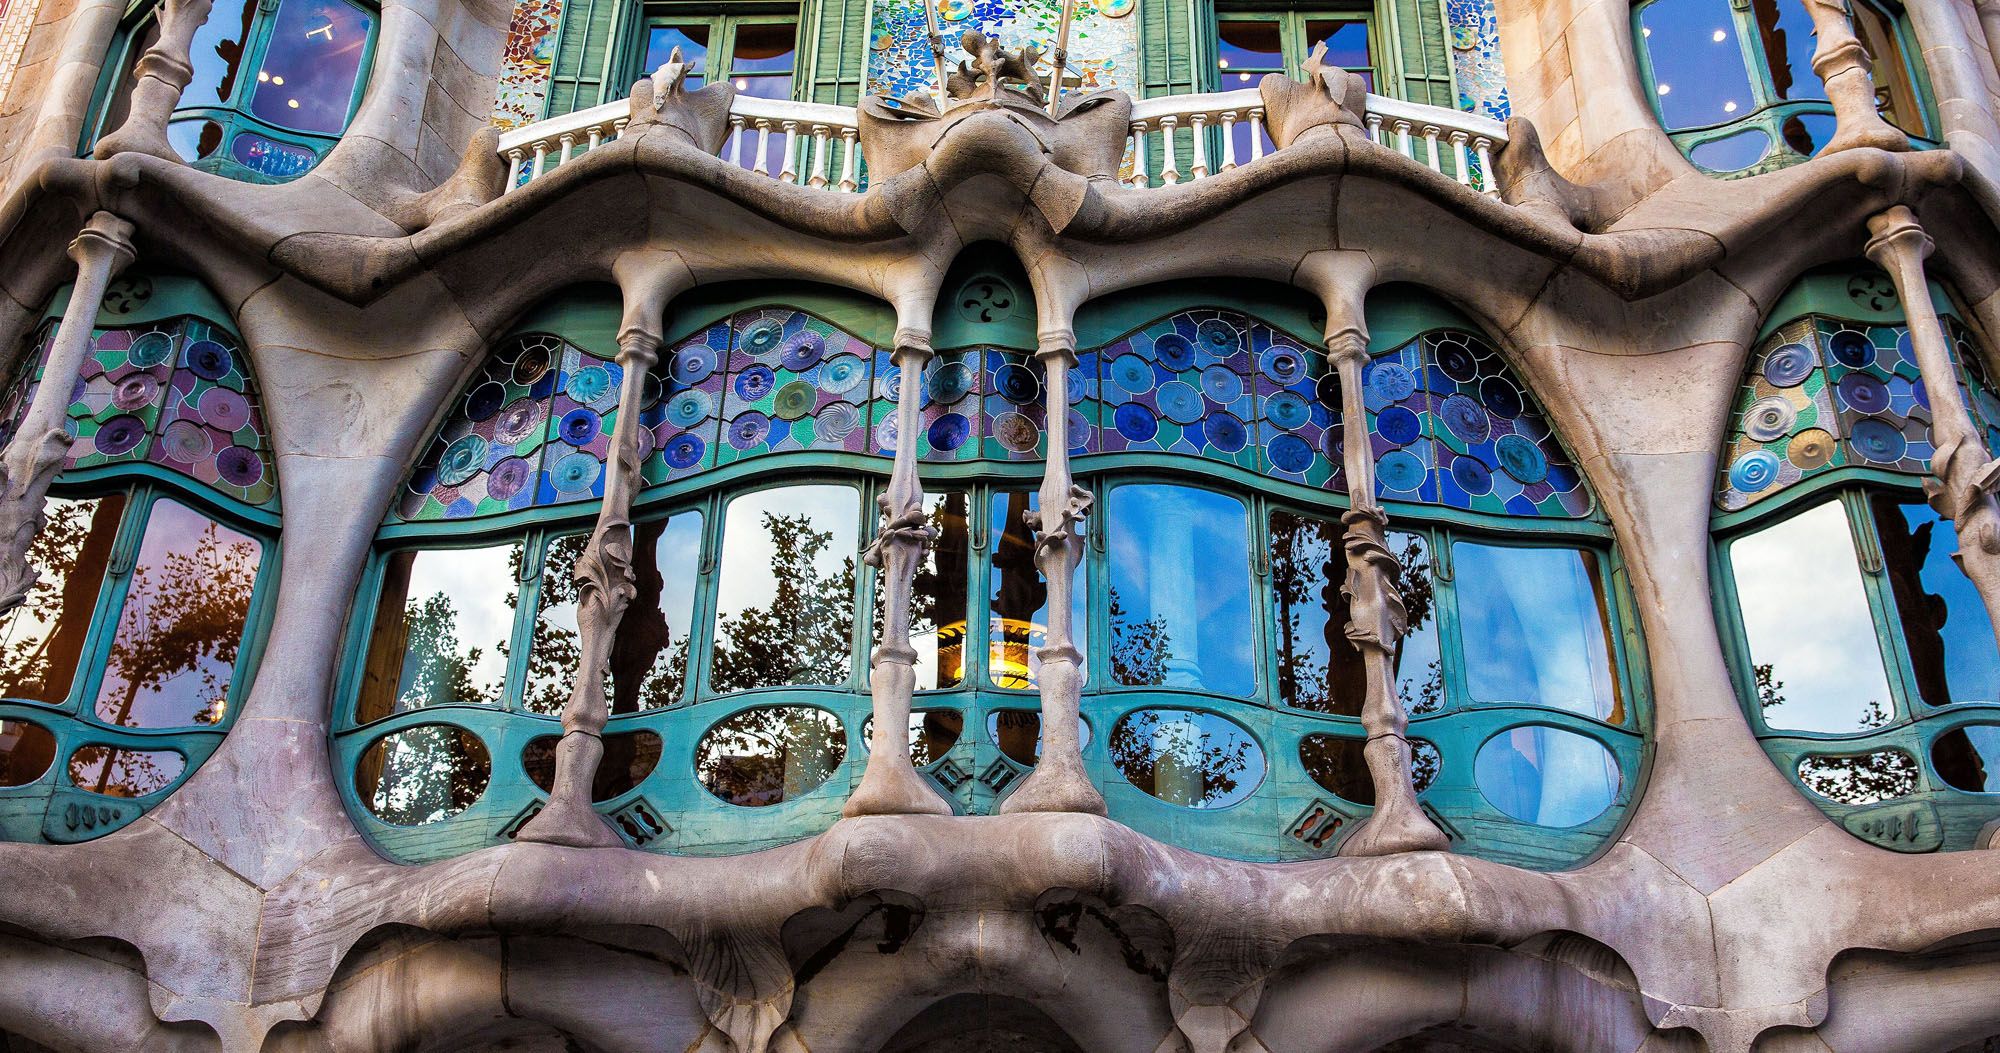 Featured image for “We’re in Barcelona!”